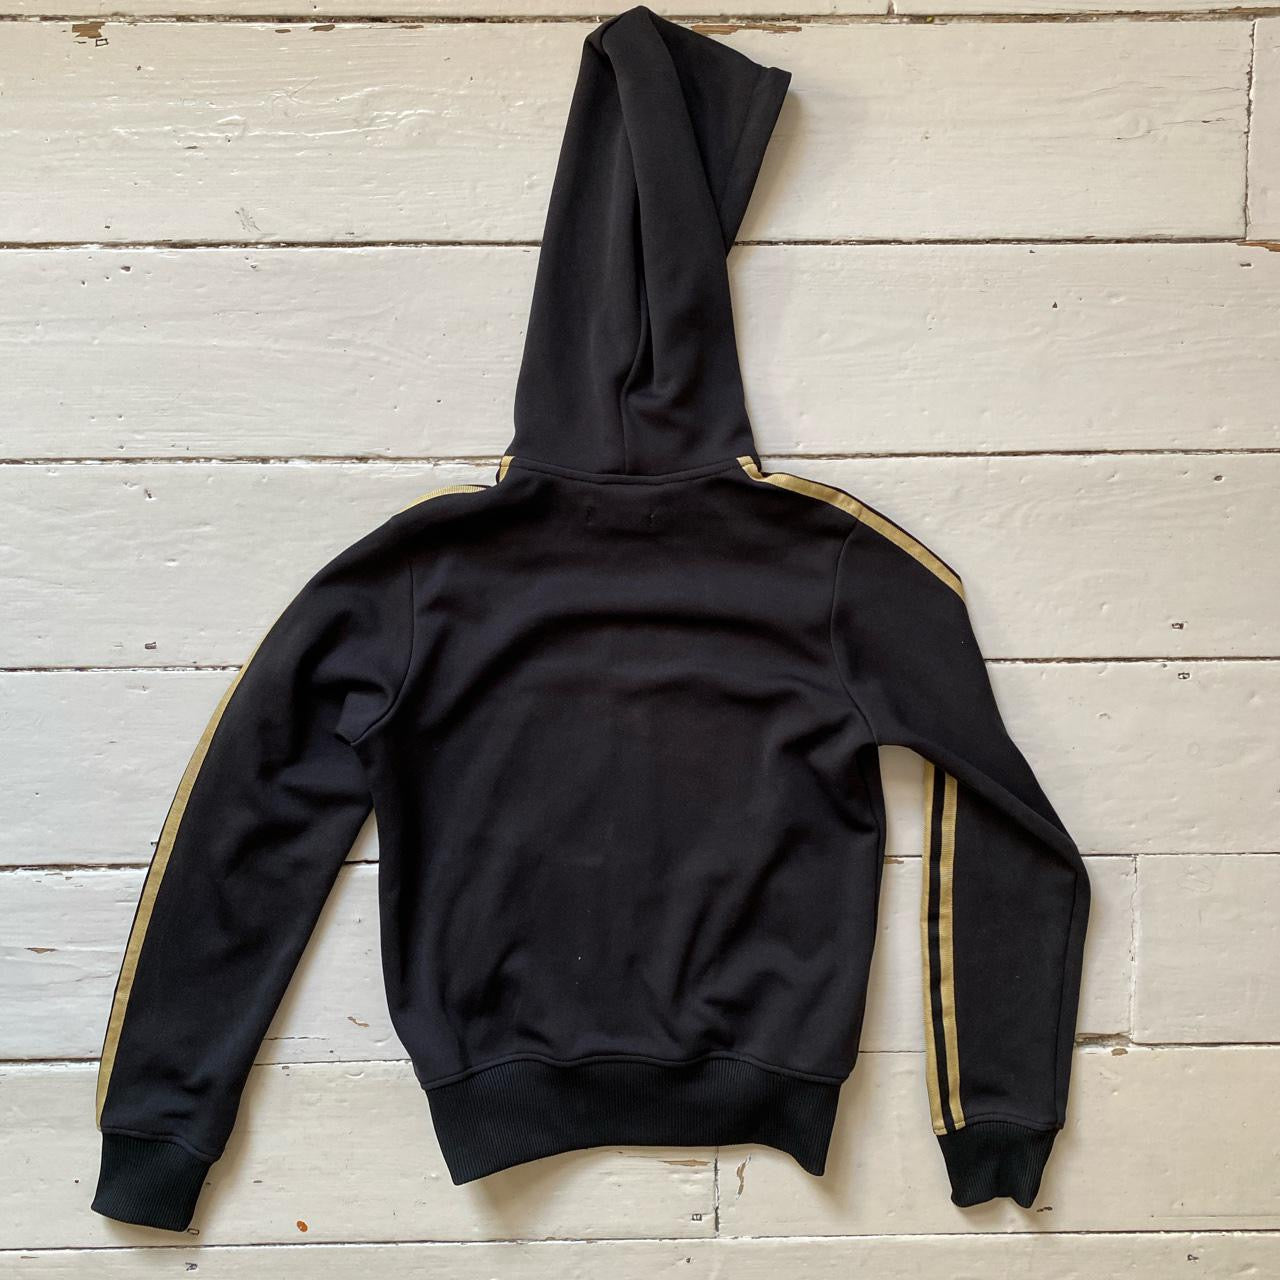 Adidas Black and Gold Hoodie (Size 8)